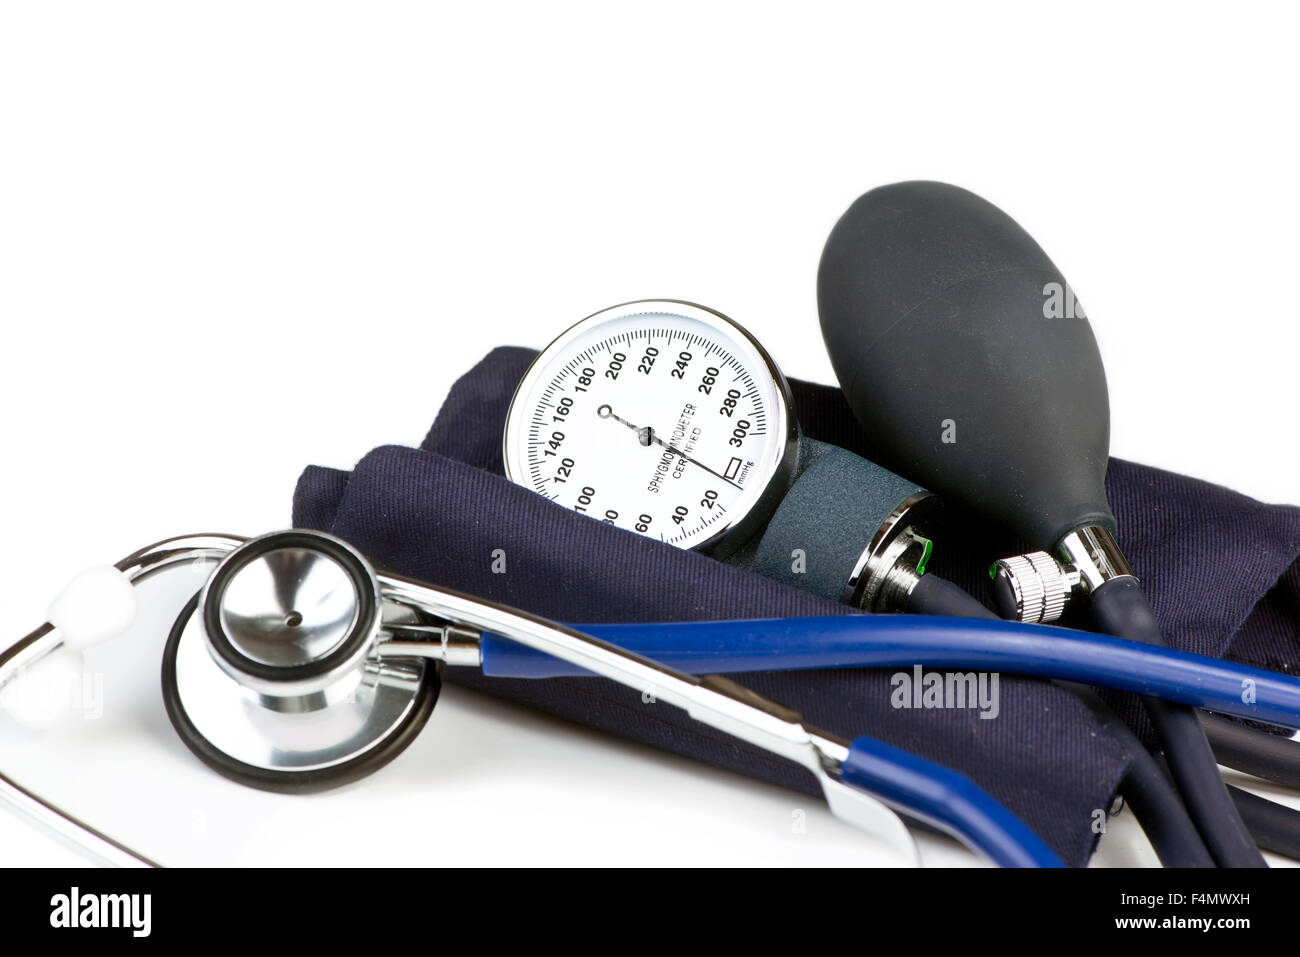 Stethoscope and blood pressure cuff on white background. Stock Photo